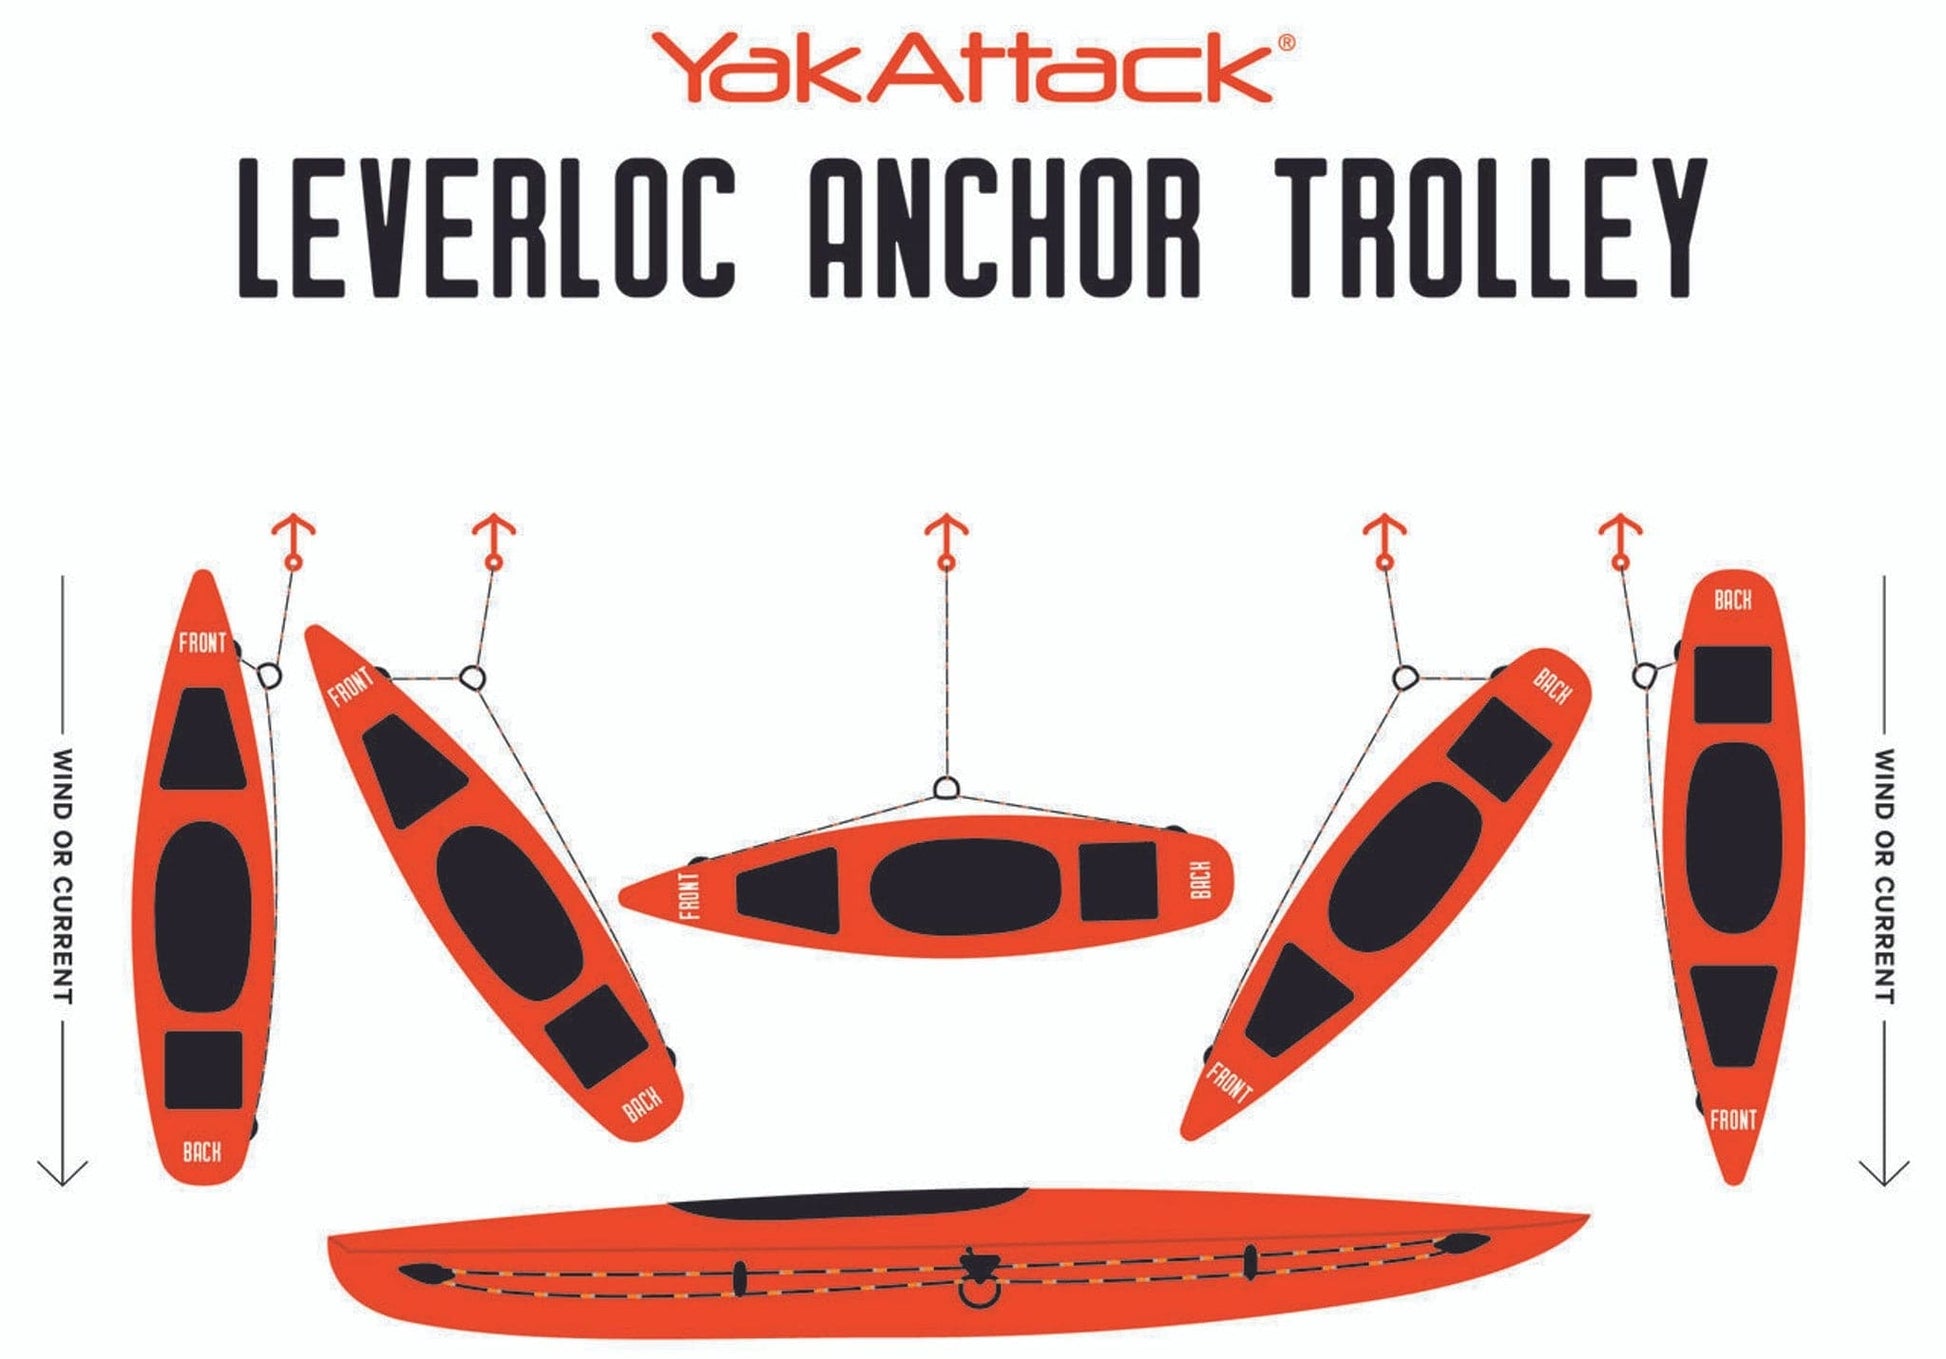 Featuring the LeverLoc Anchor Trolley  manufactured by Jackson Kayak shown here from a second angle.